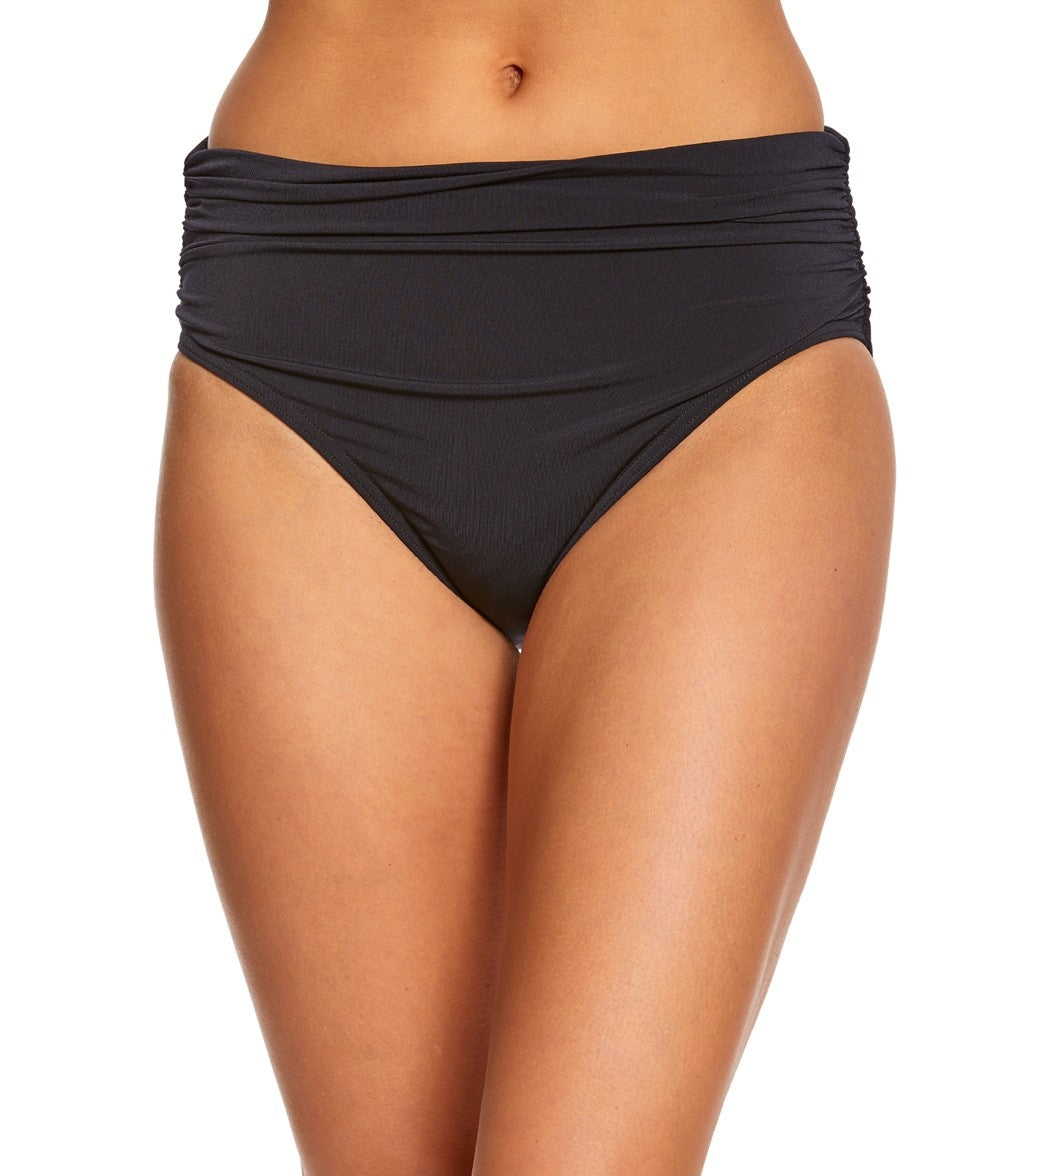 Magicsuit by Miraclesuit Solid Jersey Shirred Bikini Bottom